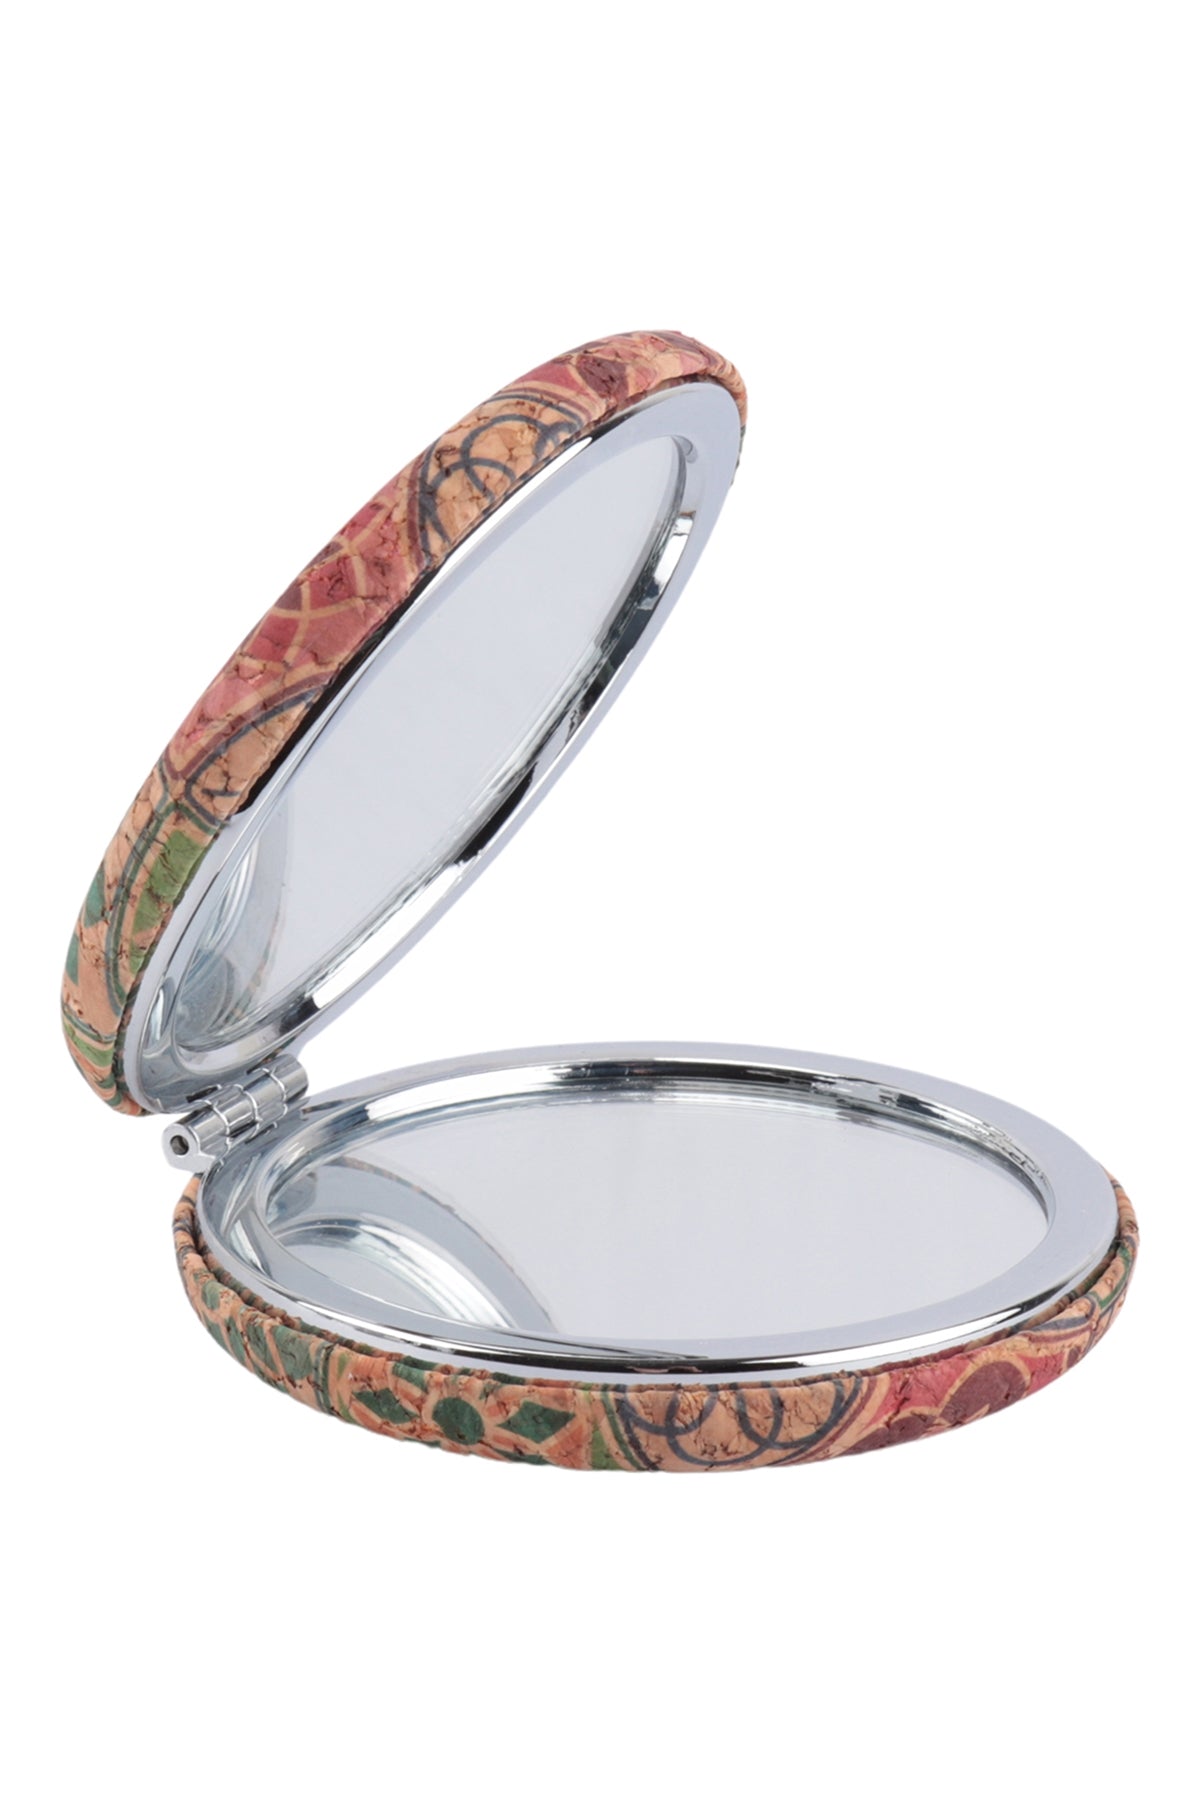 COMPACT MIRROR MORROCAN ACCENT